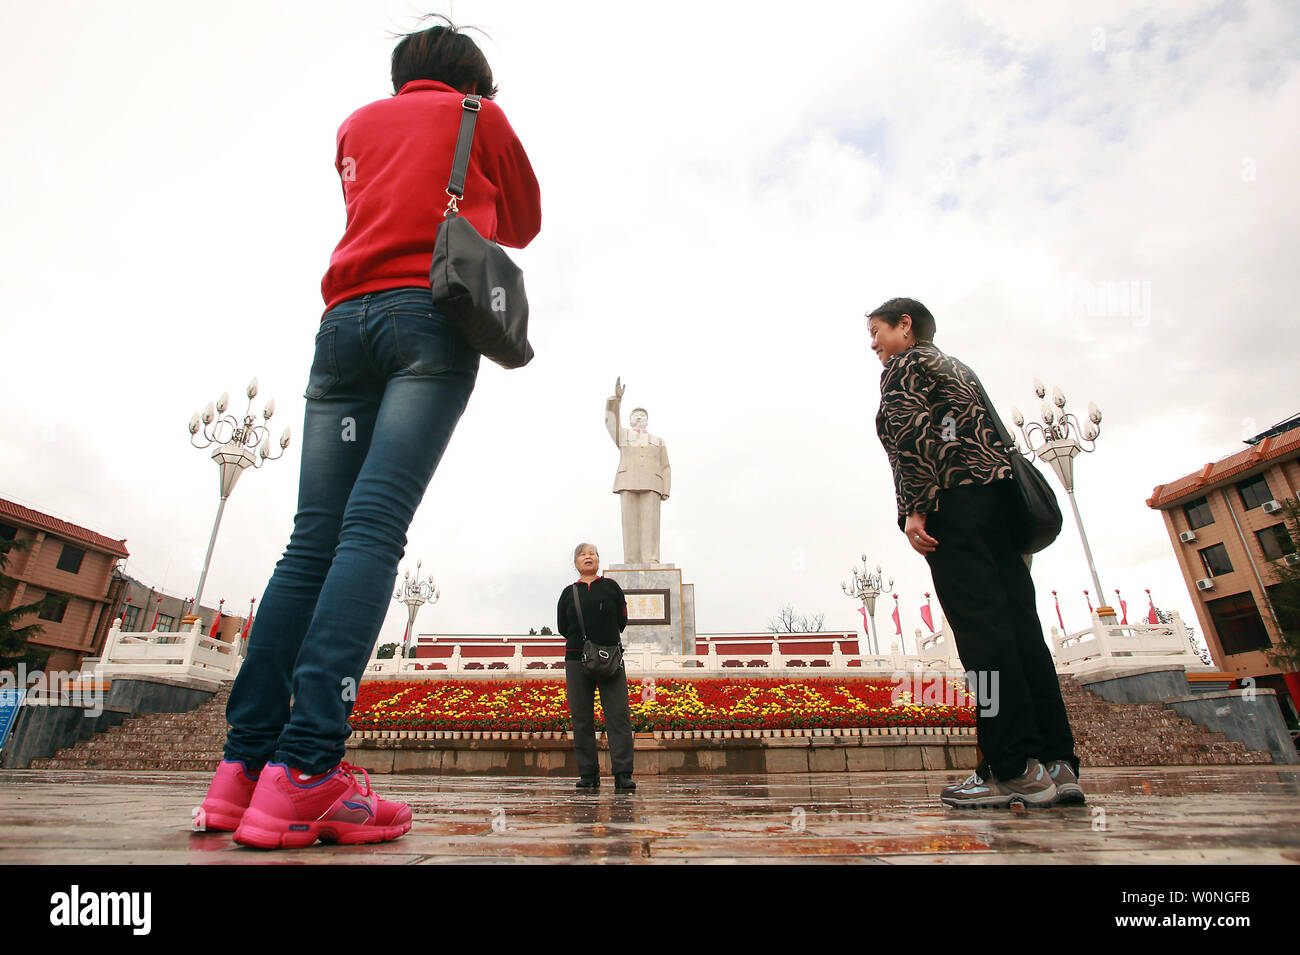 Chinese tourists take pictures in front of one of the few remaining public statutes of the late helmsman Mao Zedong in a square in Lijiang, northern Yunnan Province, on September 29, 2012.    During the Cultural Revolution under the Red Guard, Mao's already glorified image manifested into a personality cult that influenced every aspect of Chinese life, and still persists to across the country.    UPI/Stephen Shaver Stock Photo